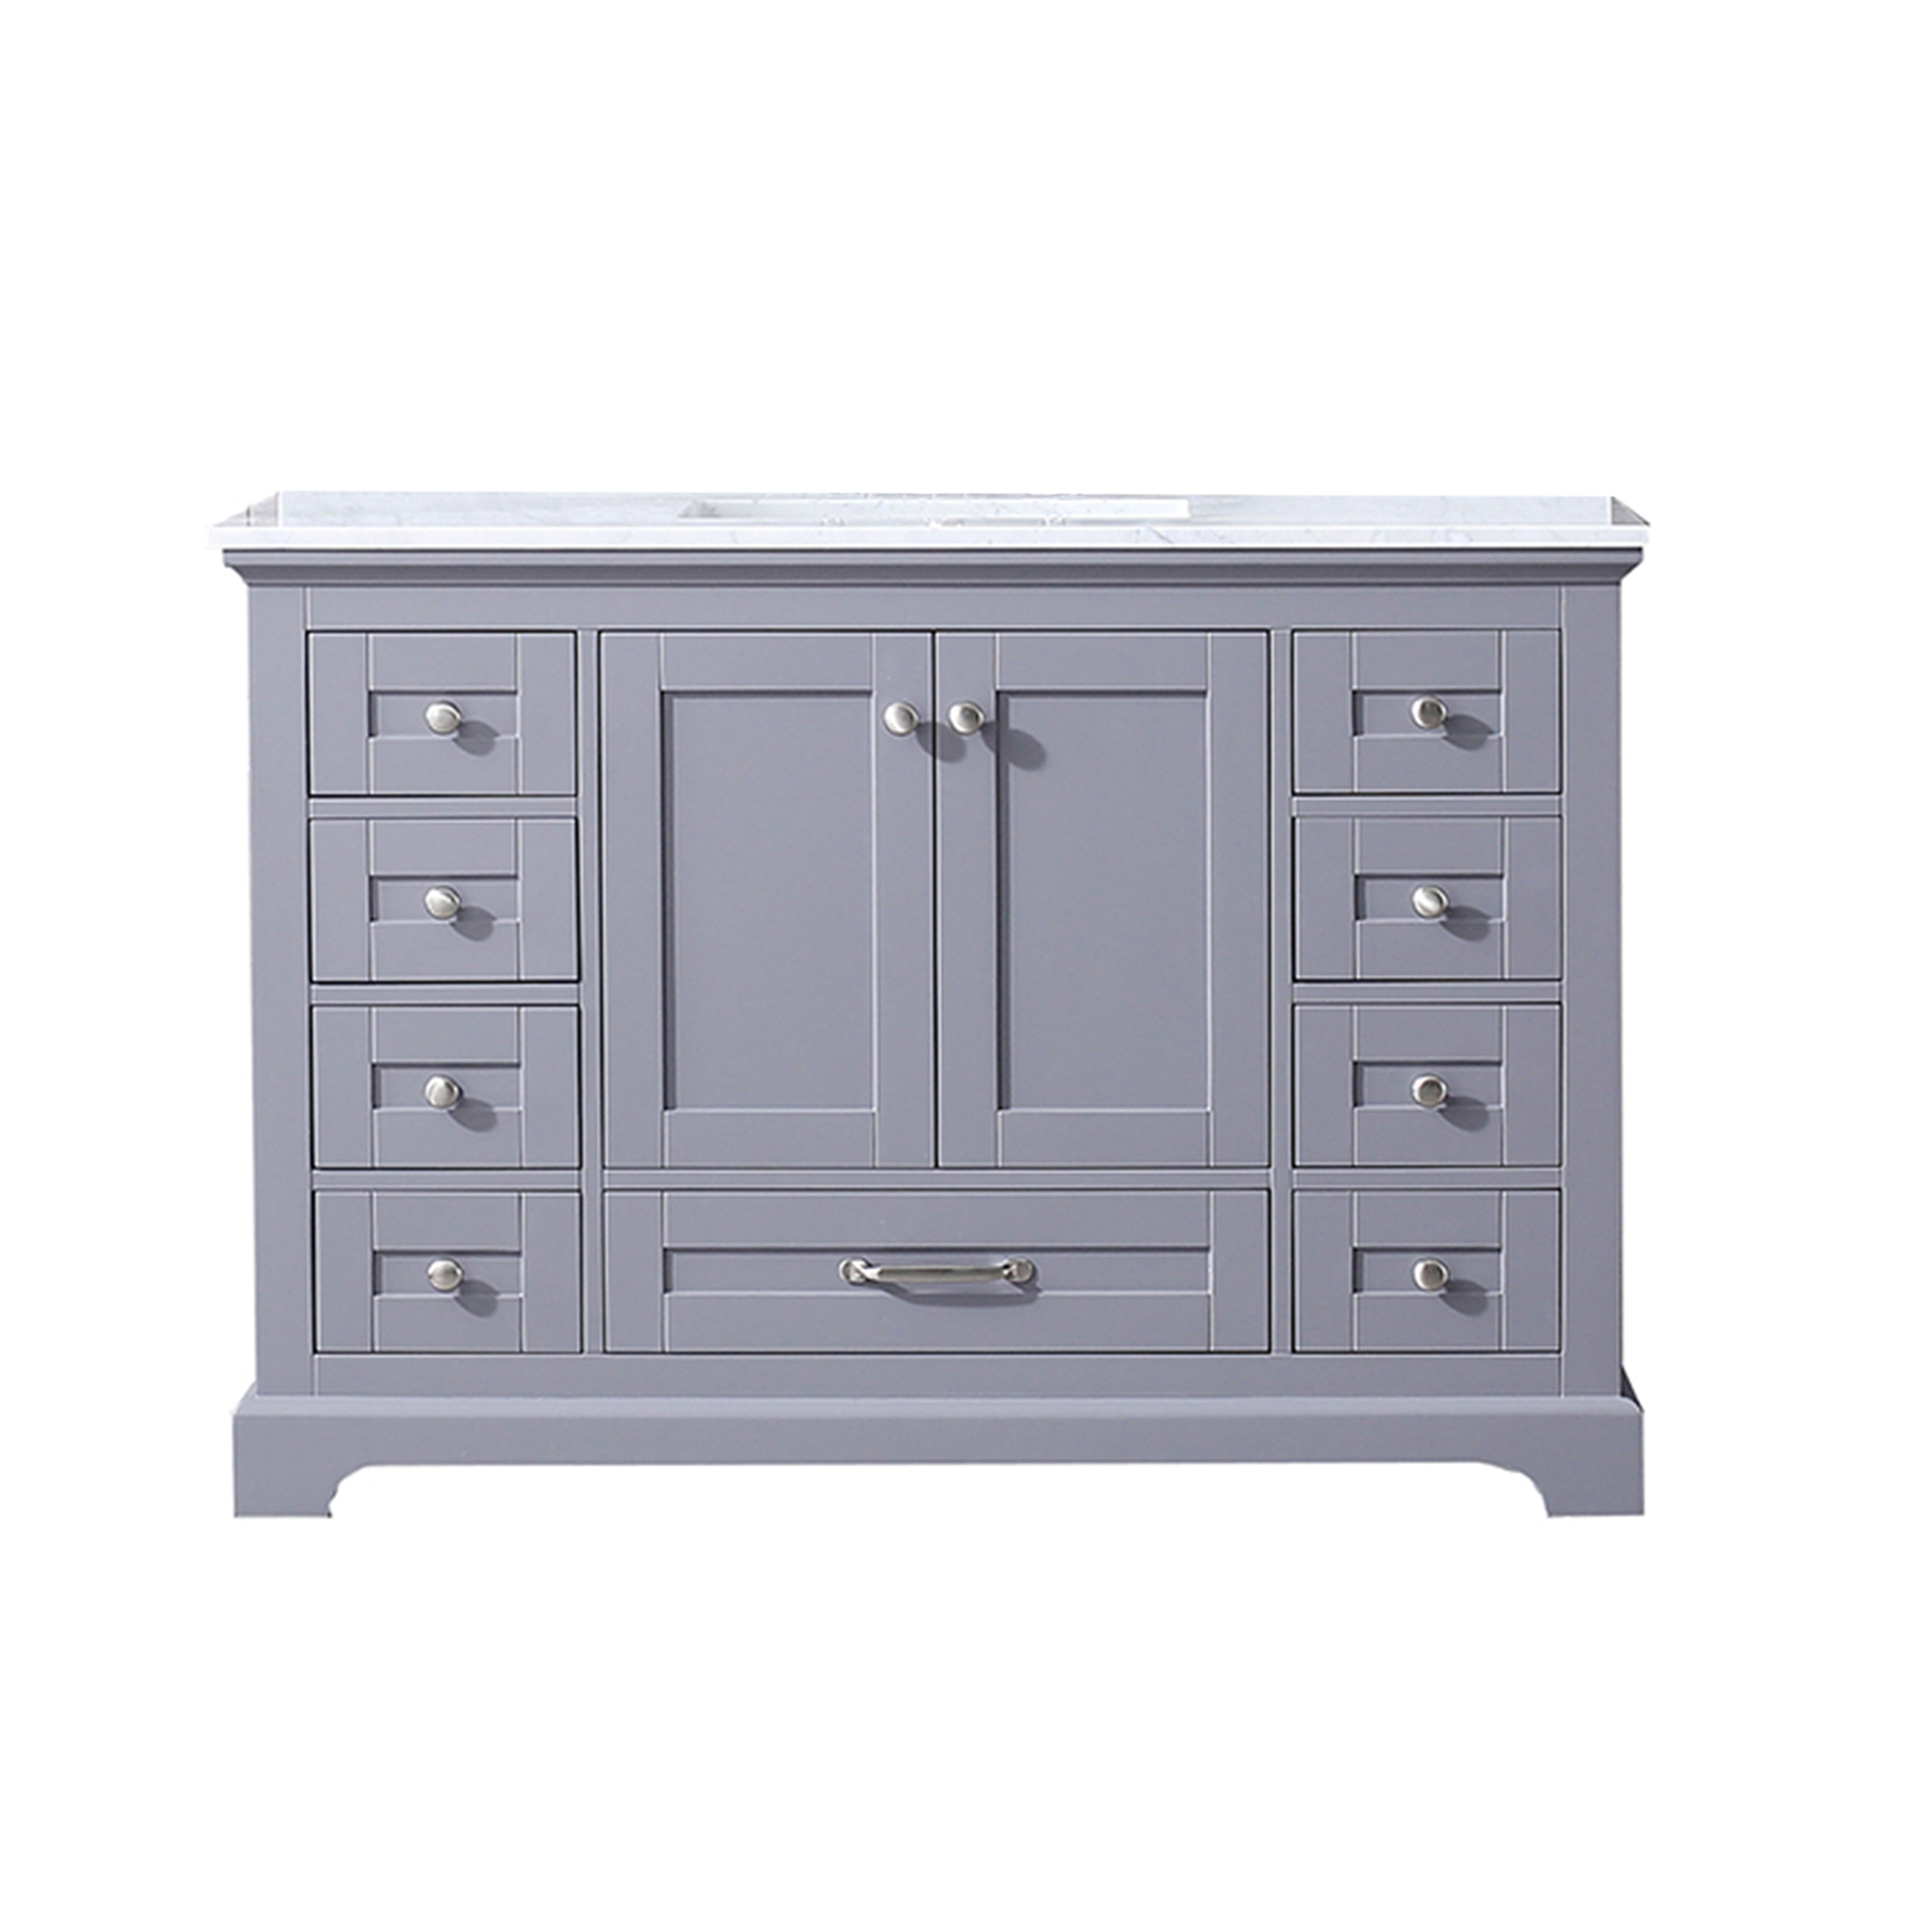 Lexora Dukes LD342248SBDS000 48" Single Bathroom Vanity in Dark Grey with White Carrara Marble, White Rectangle Sink, Front View